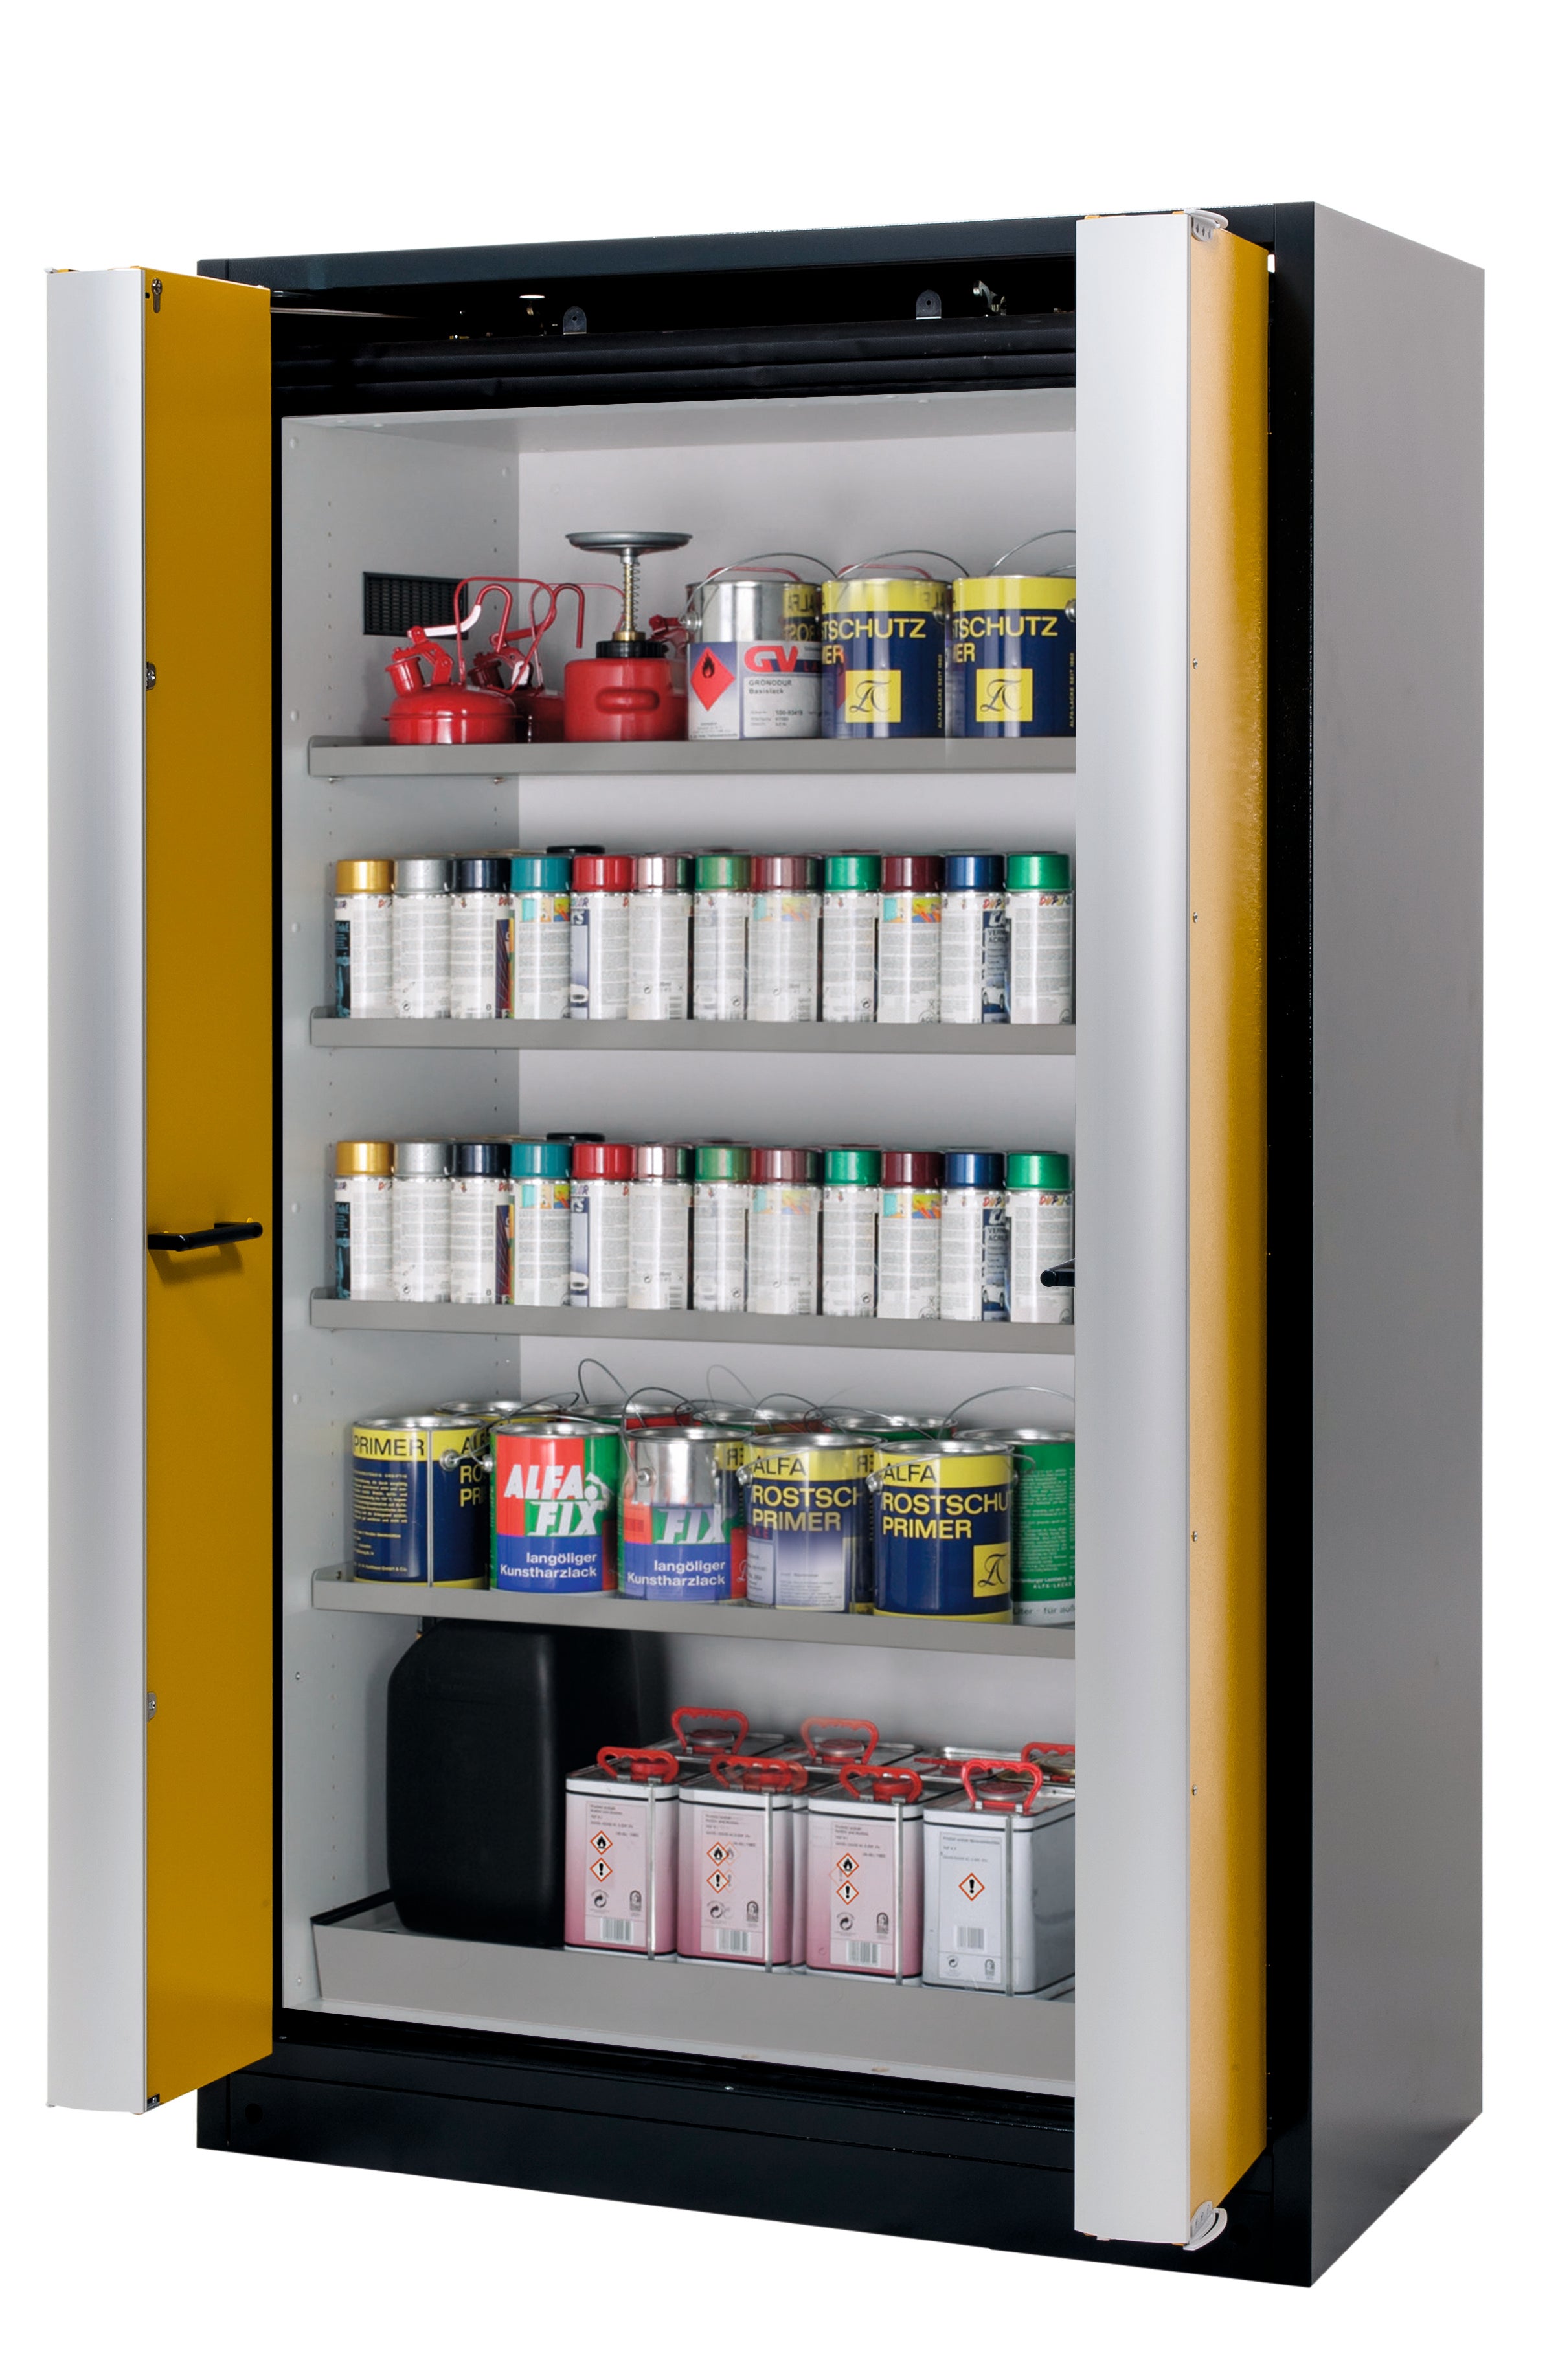 Type 90 safety cabinet Q-PHOENIX-90 model Q90.195.120.FD in safety yellow RAL 1004 with 4x standard shelves (stainless steel 1.4301)